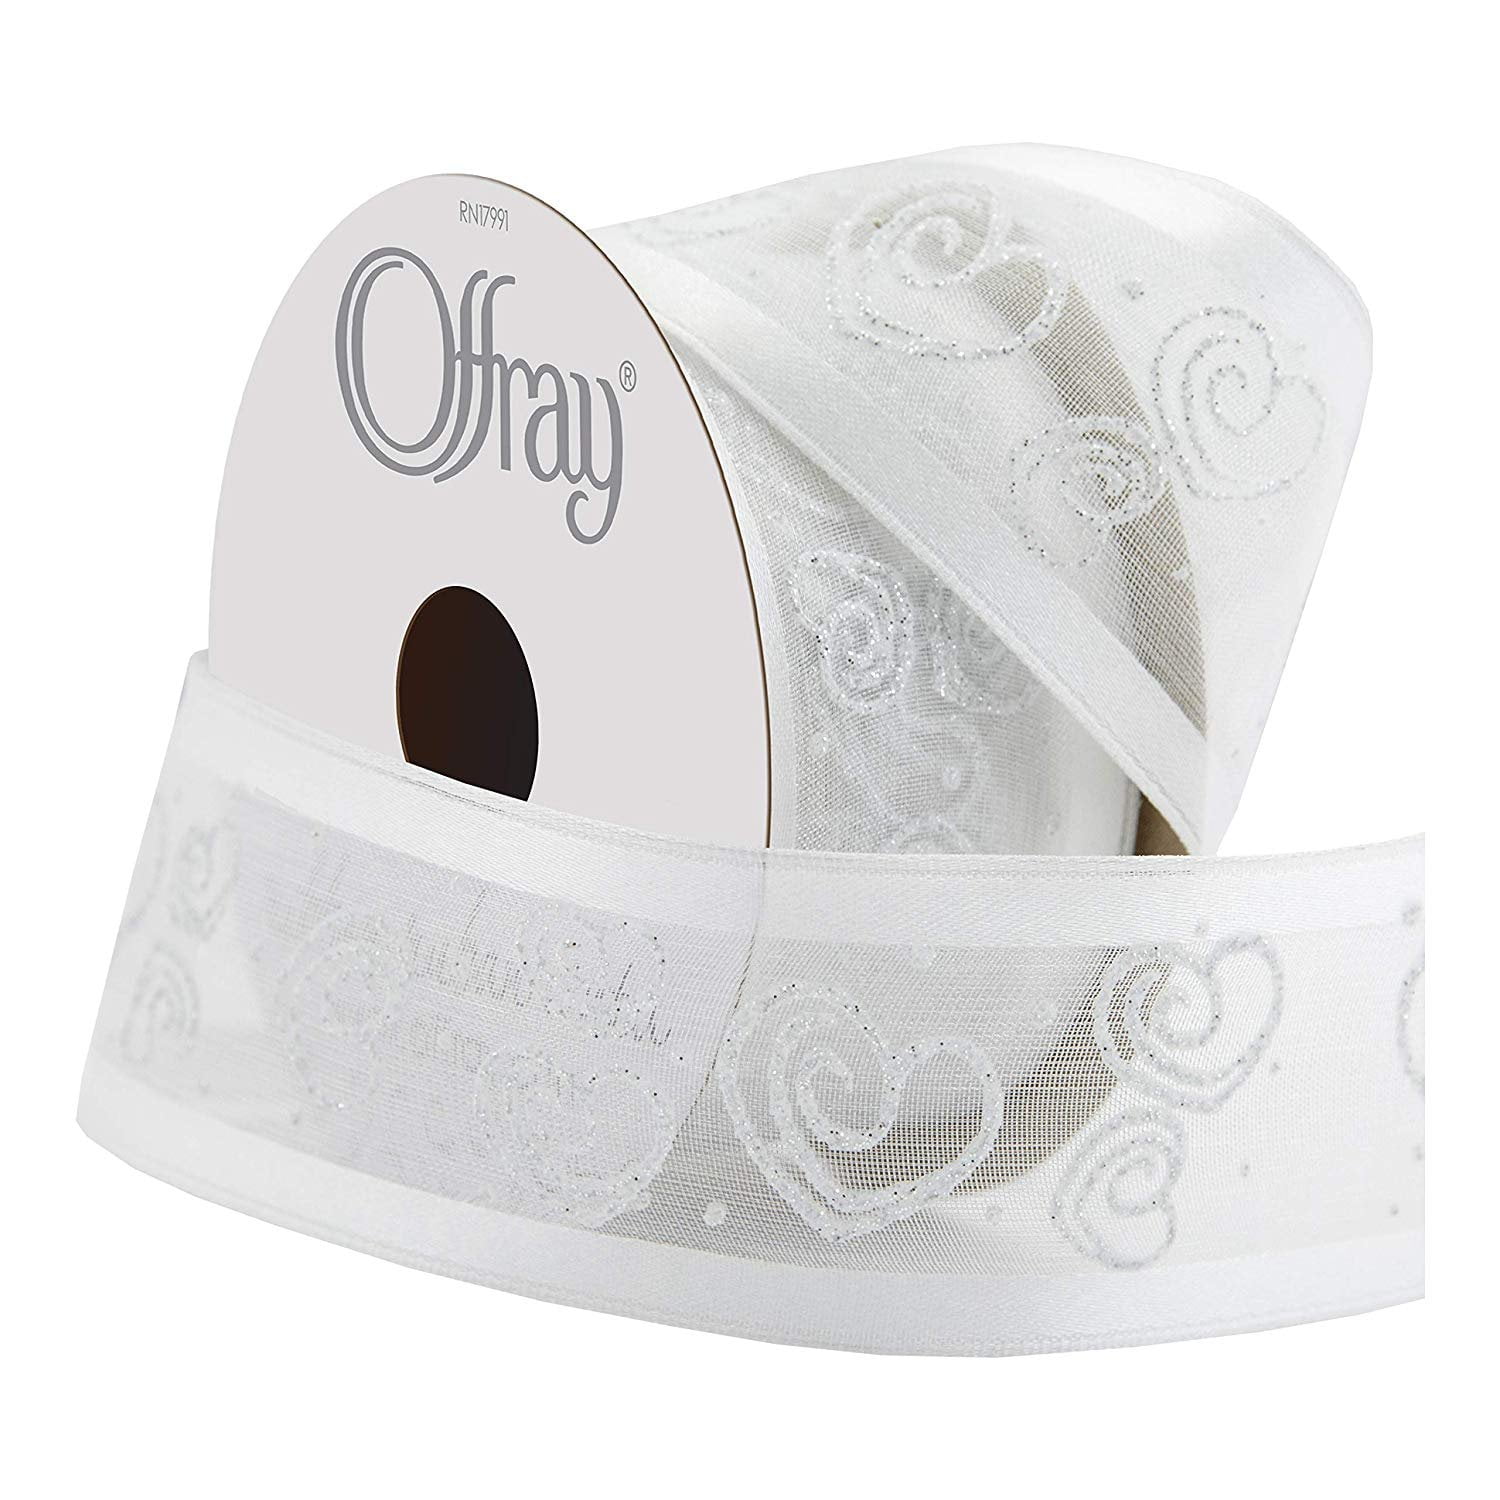 Offray Ribbon, White 1 1/2 inch Cutout Satin Ribbon for Sewing, Crafts, and  Wedding, 9 feet, 1 Each 